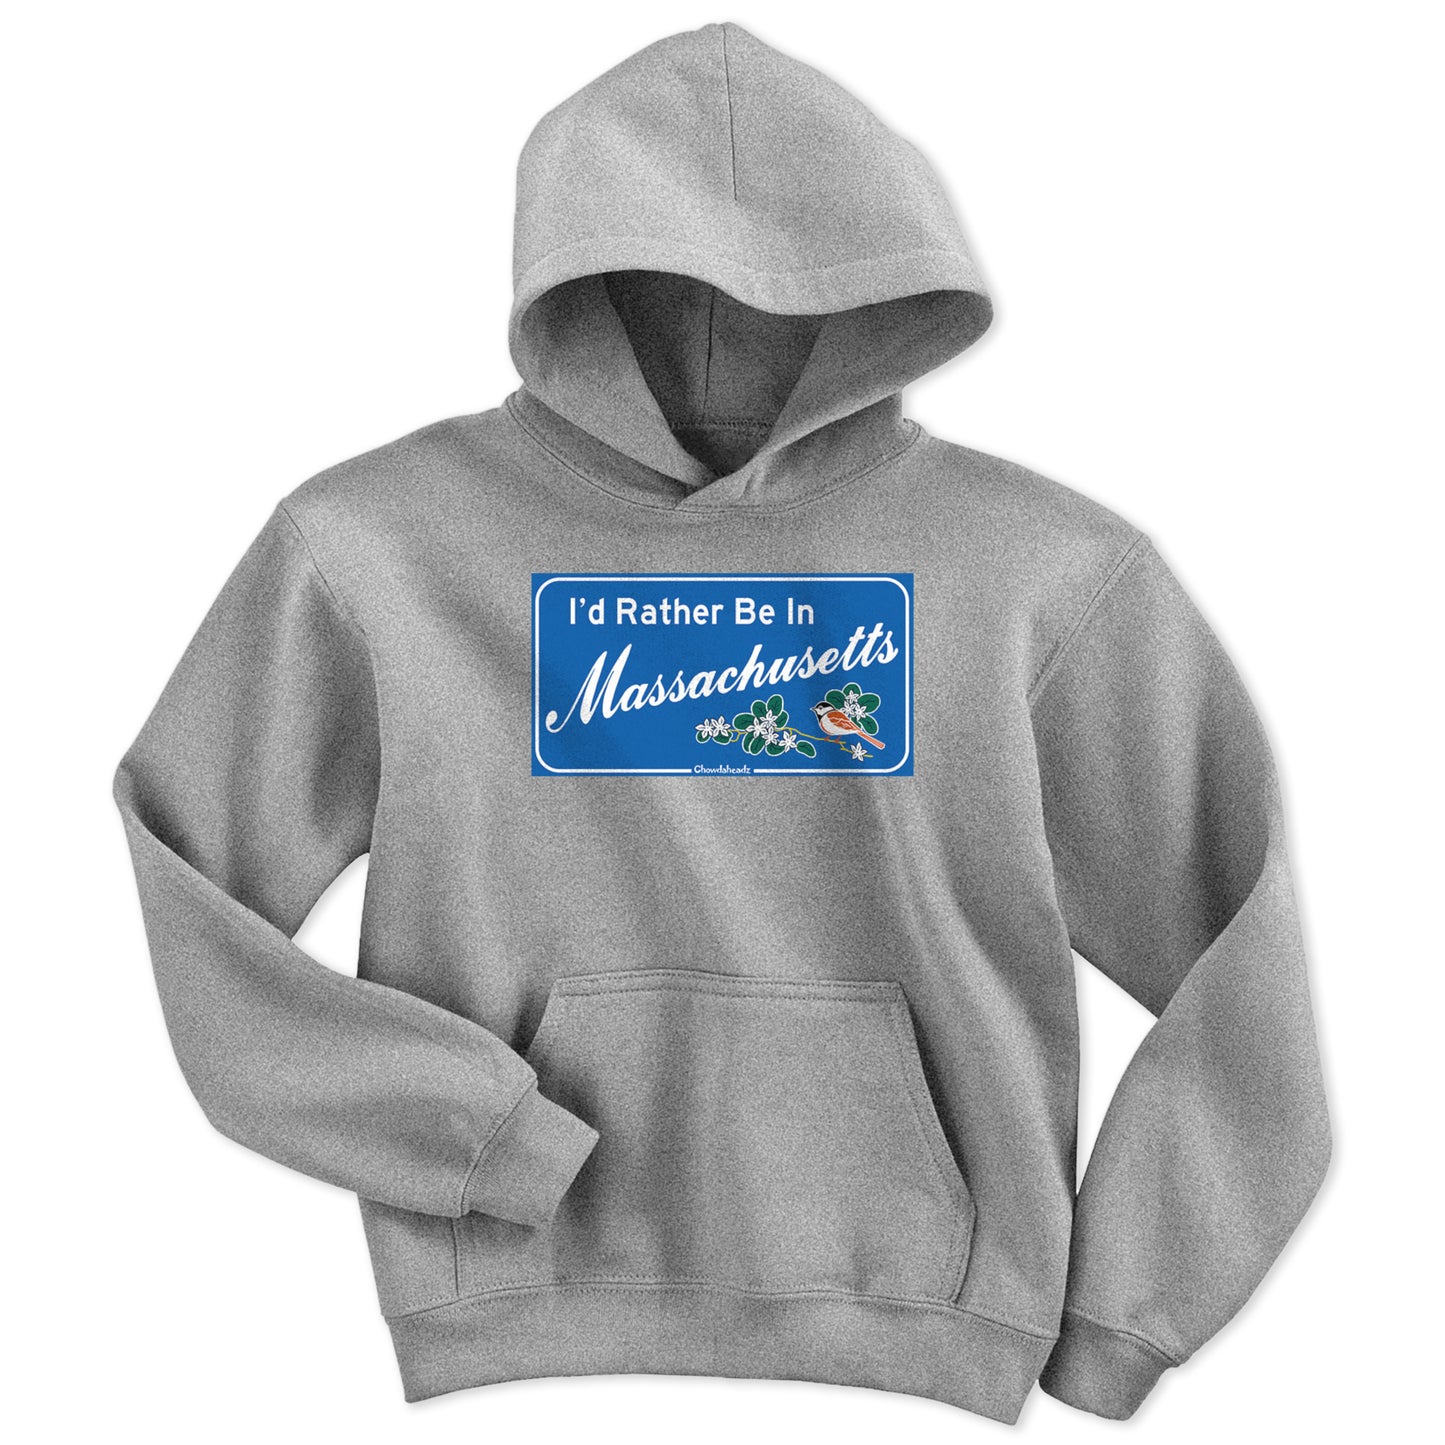 I'd Rather Be In Massachusetts Sign Youth Hoodie - Chowdaheadz